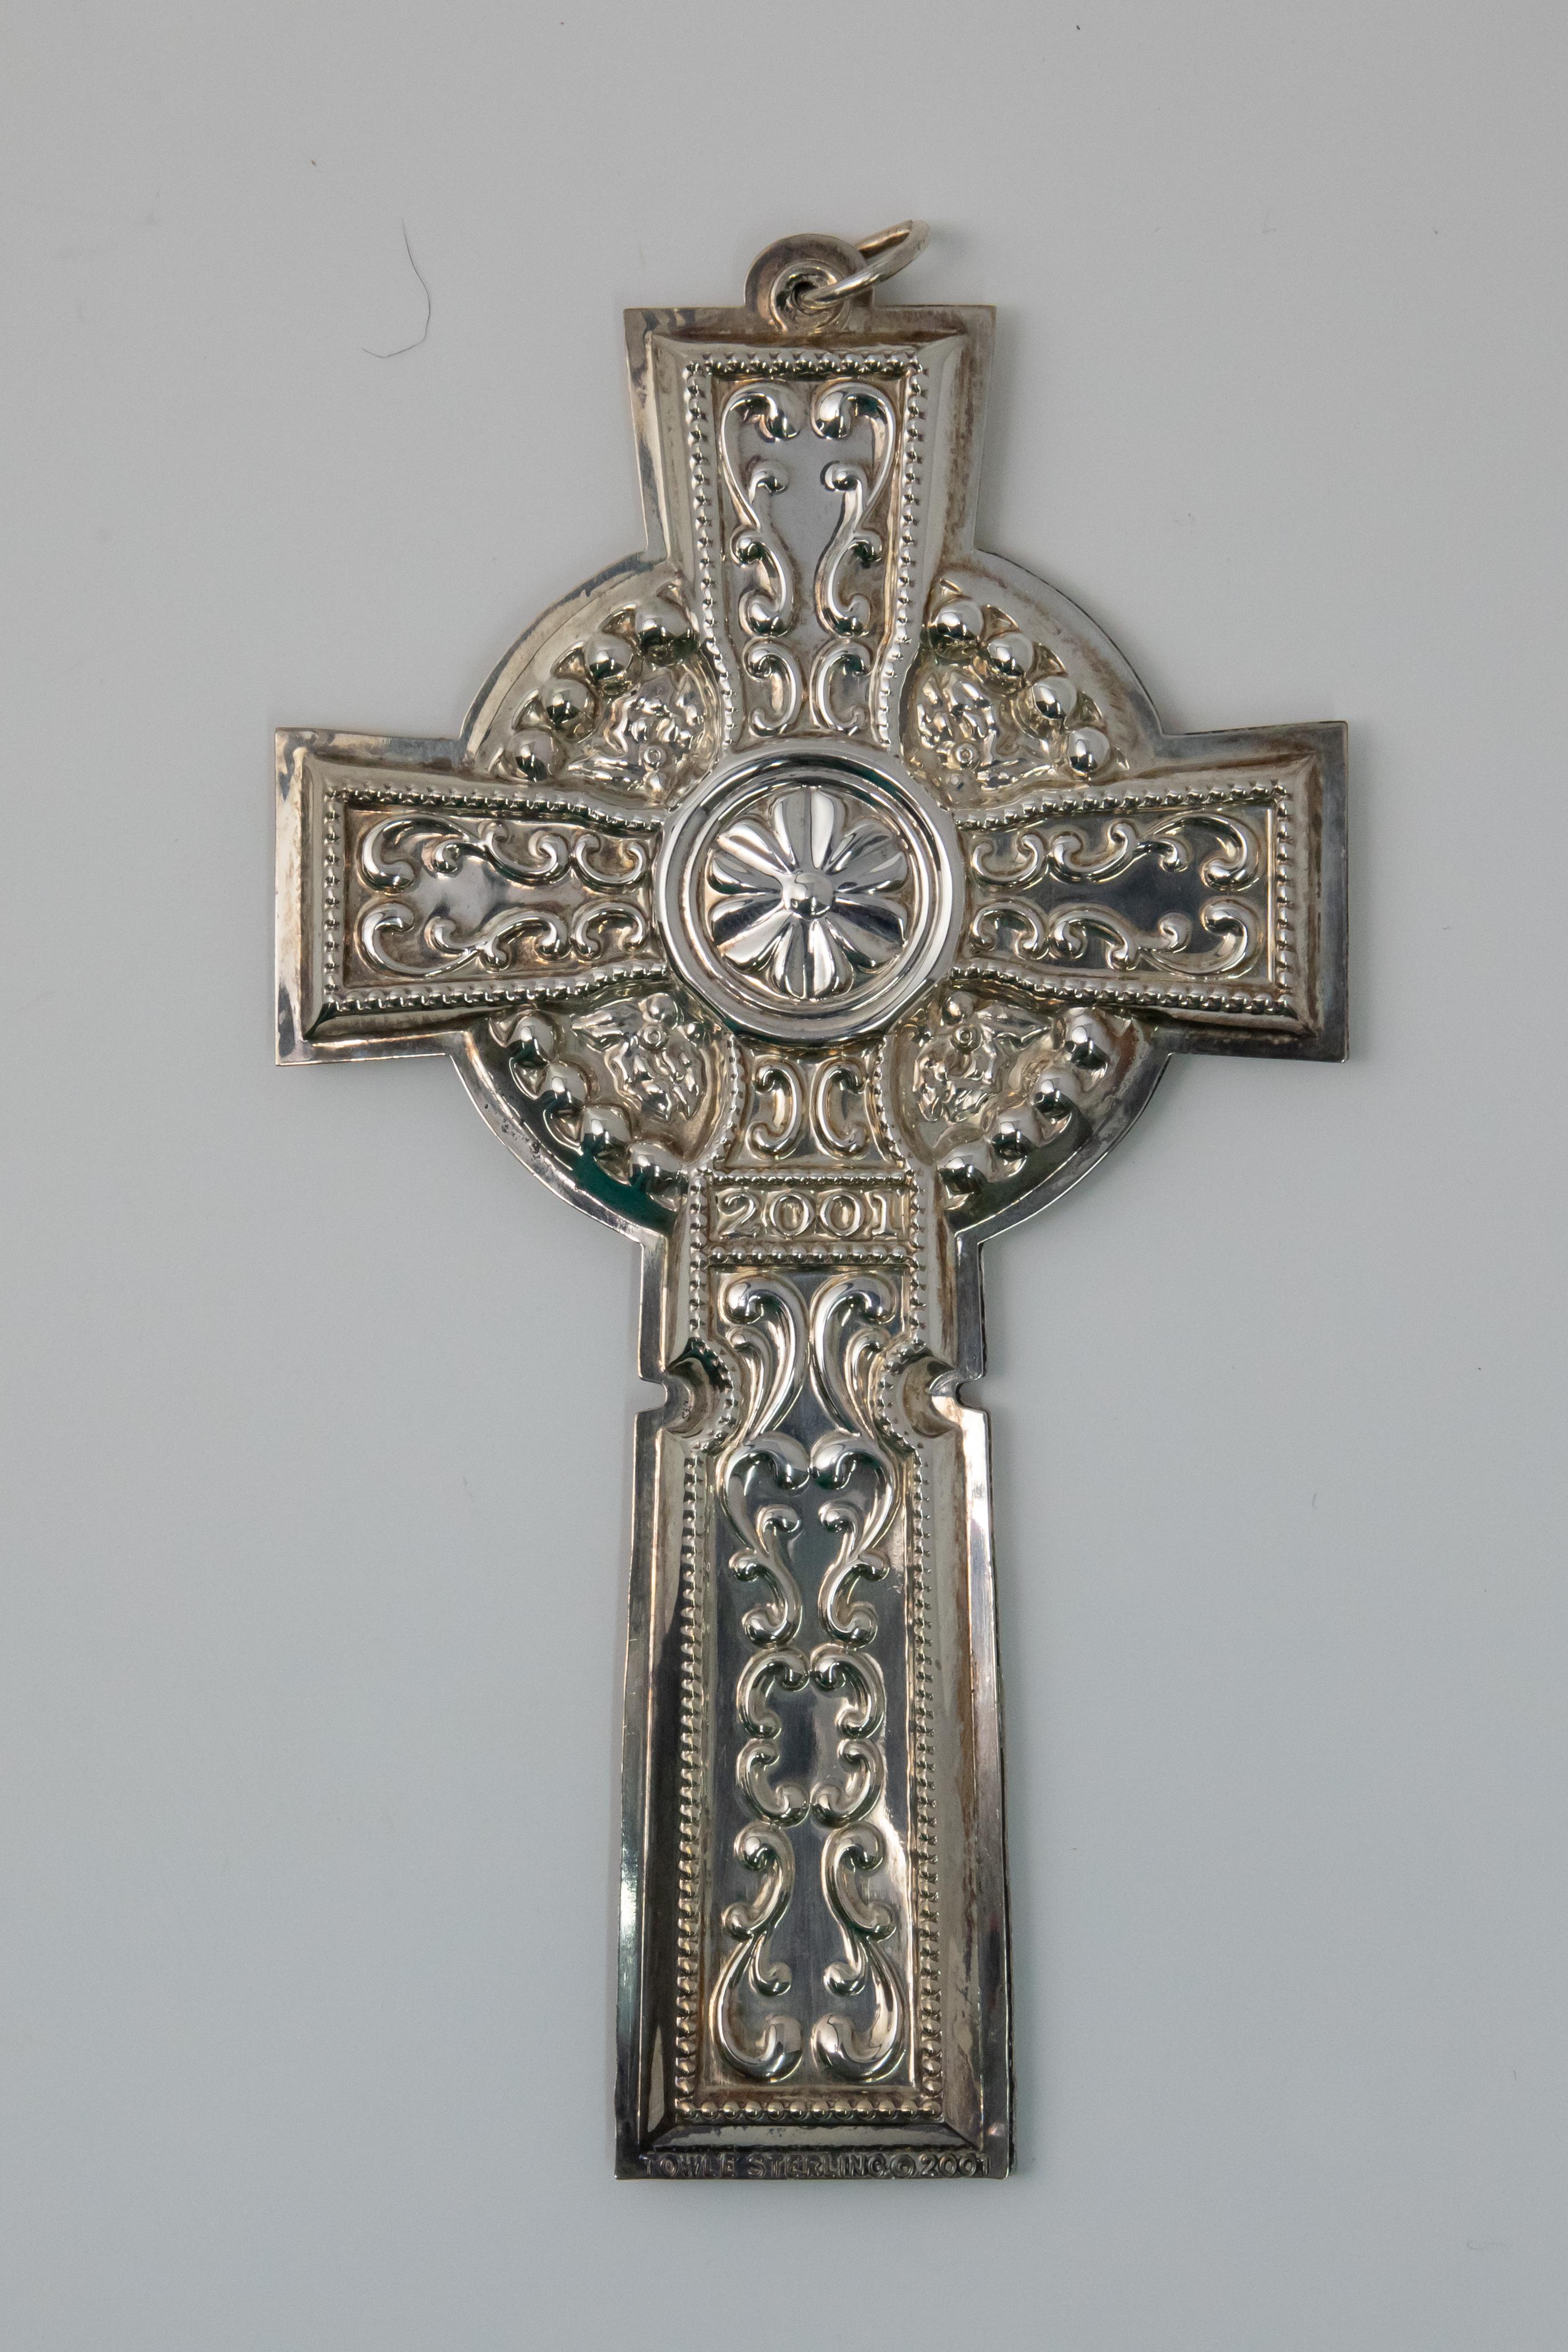 Offering a gorgeous Towle sterling cross ornament from 2001. Having foliate and spiral designs to the four arms. The bottom arm has 2001 inscribed towards the top. There is a circle with foliate design and in the middle is a floral design.